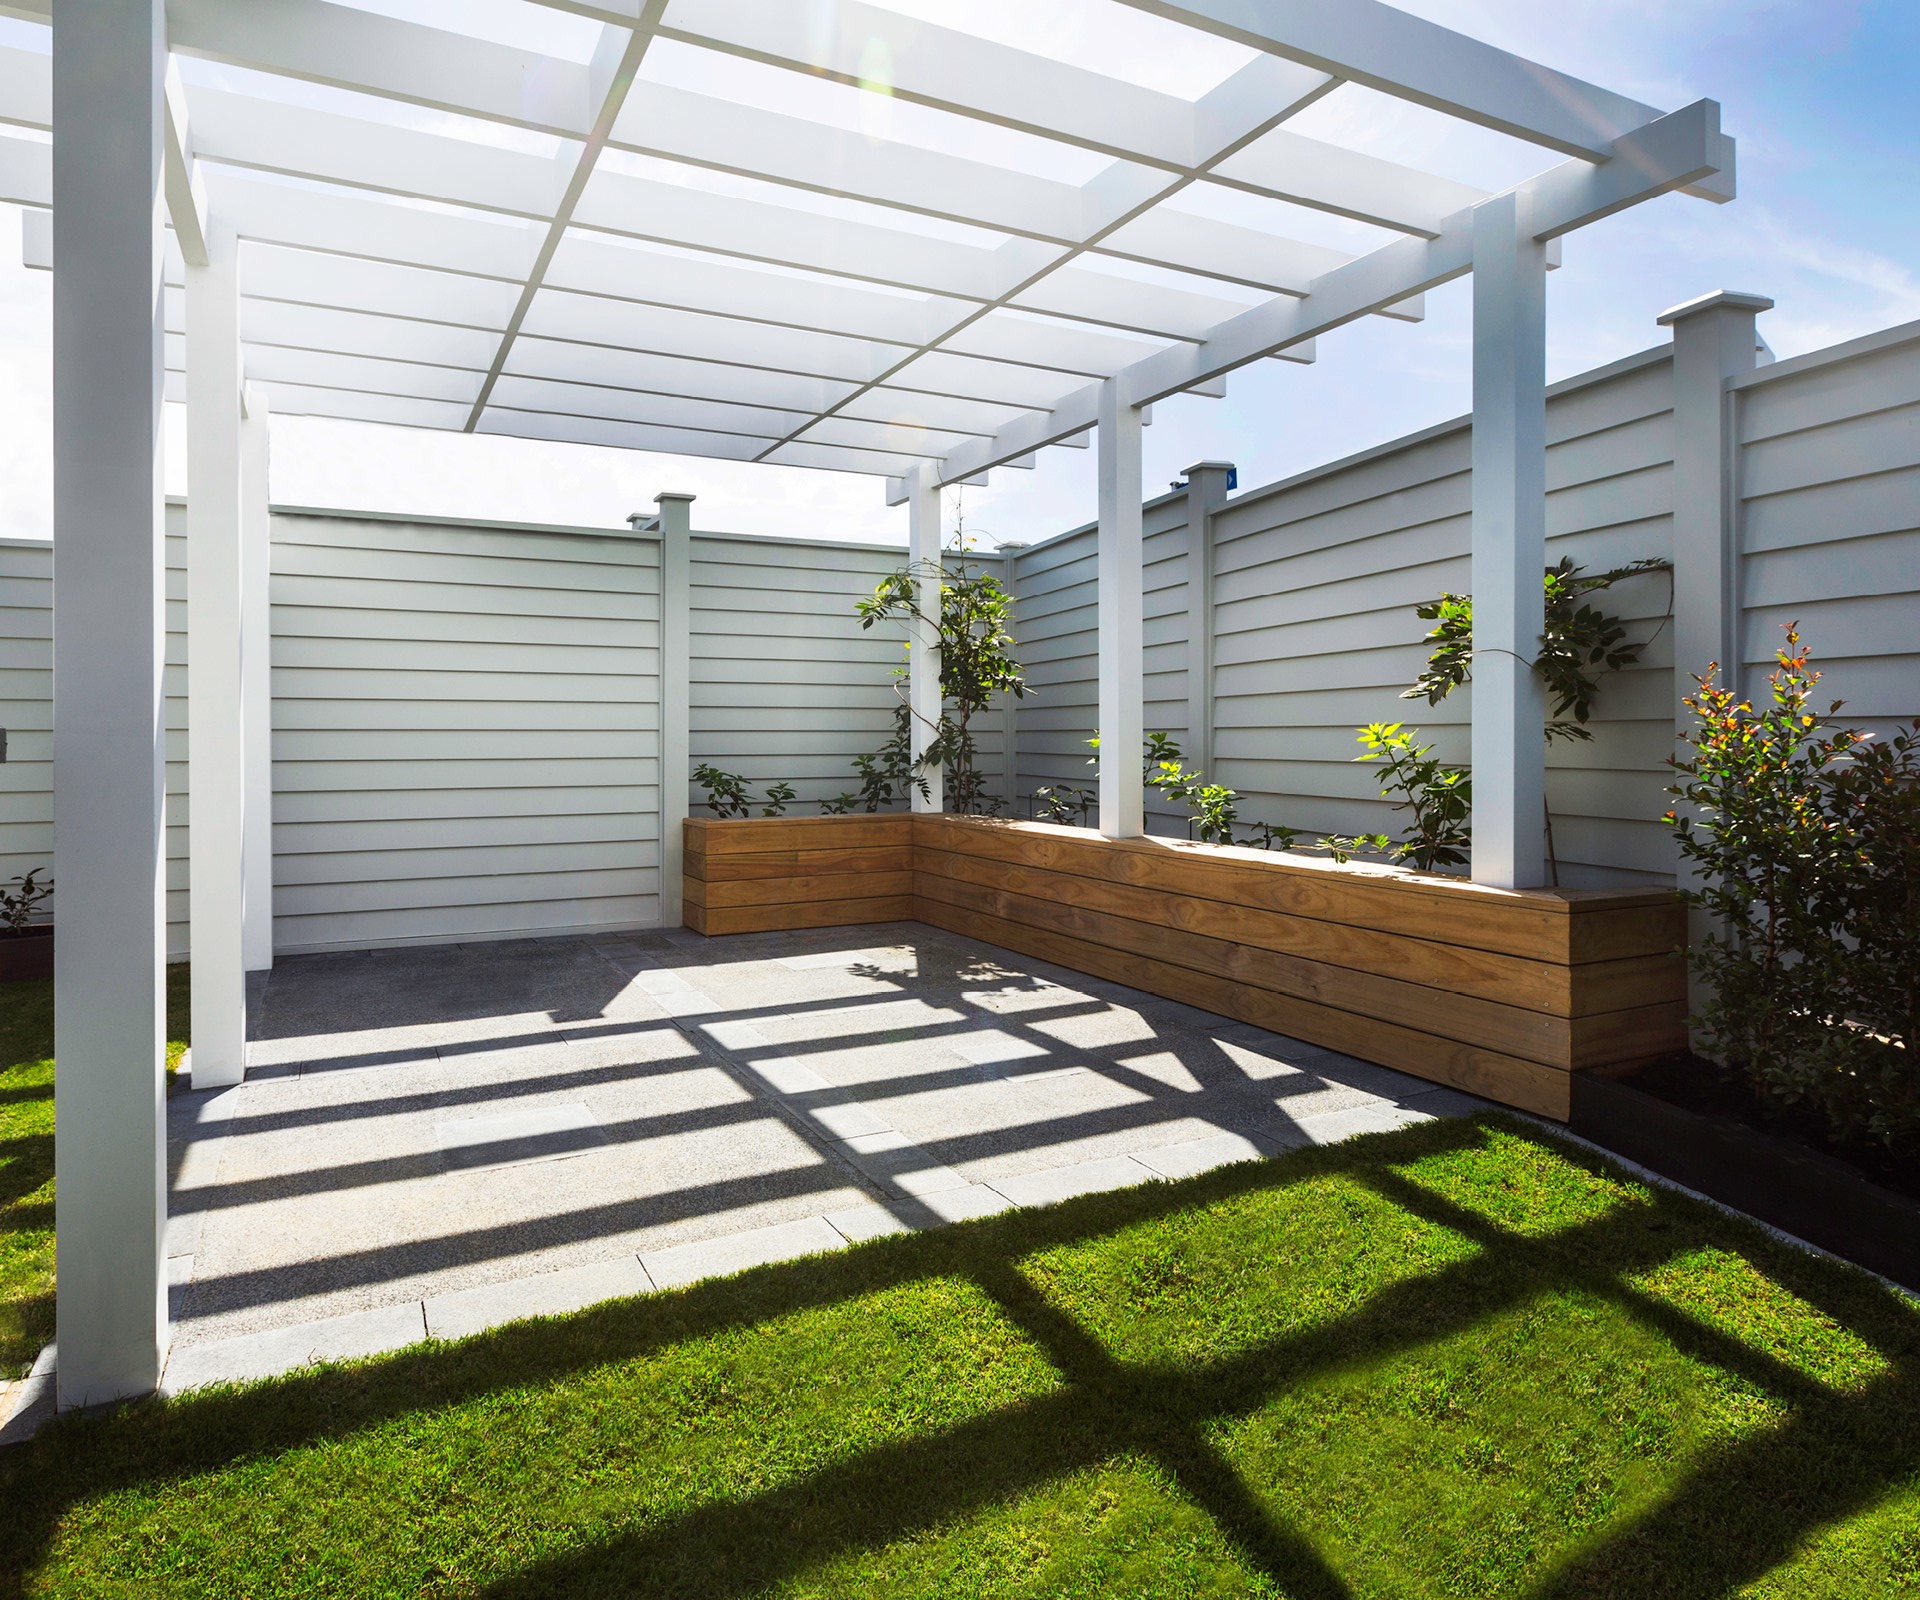 PlaceMakers outdoor pergola